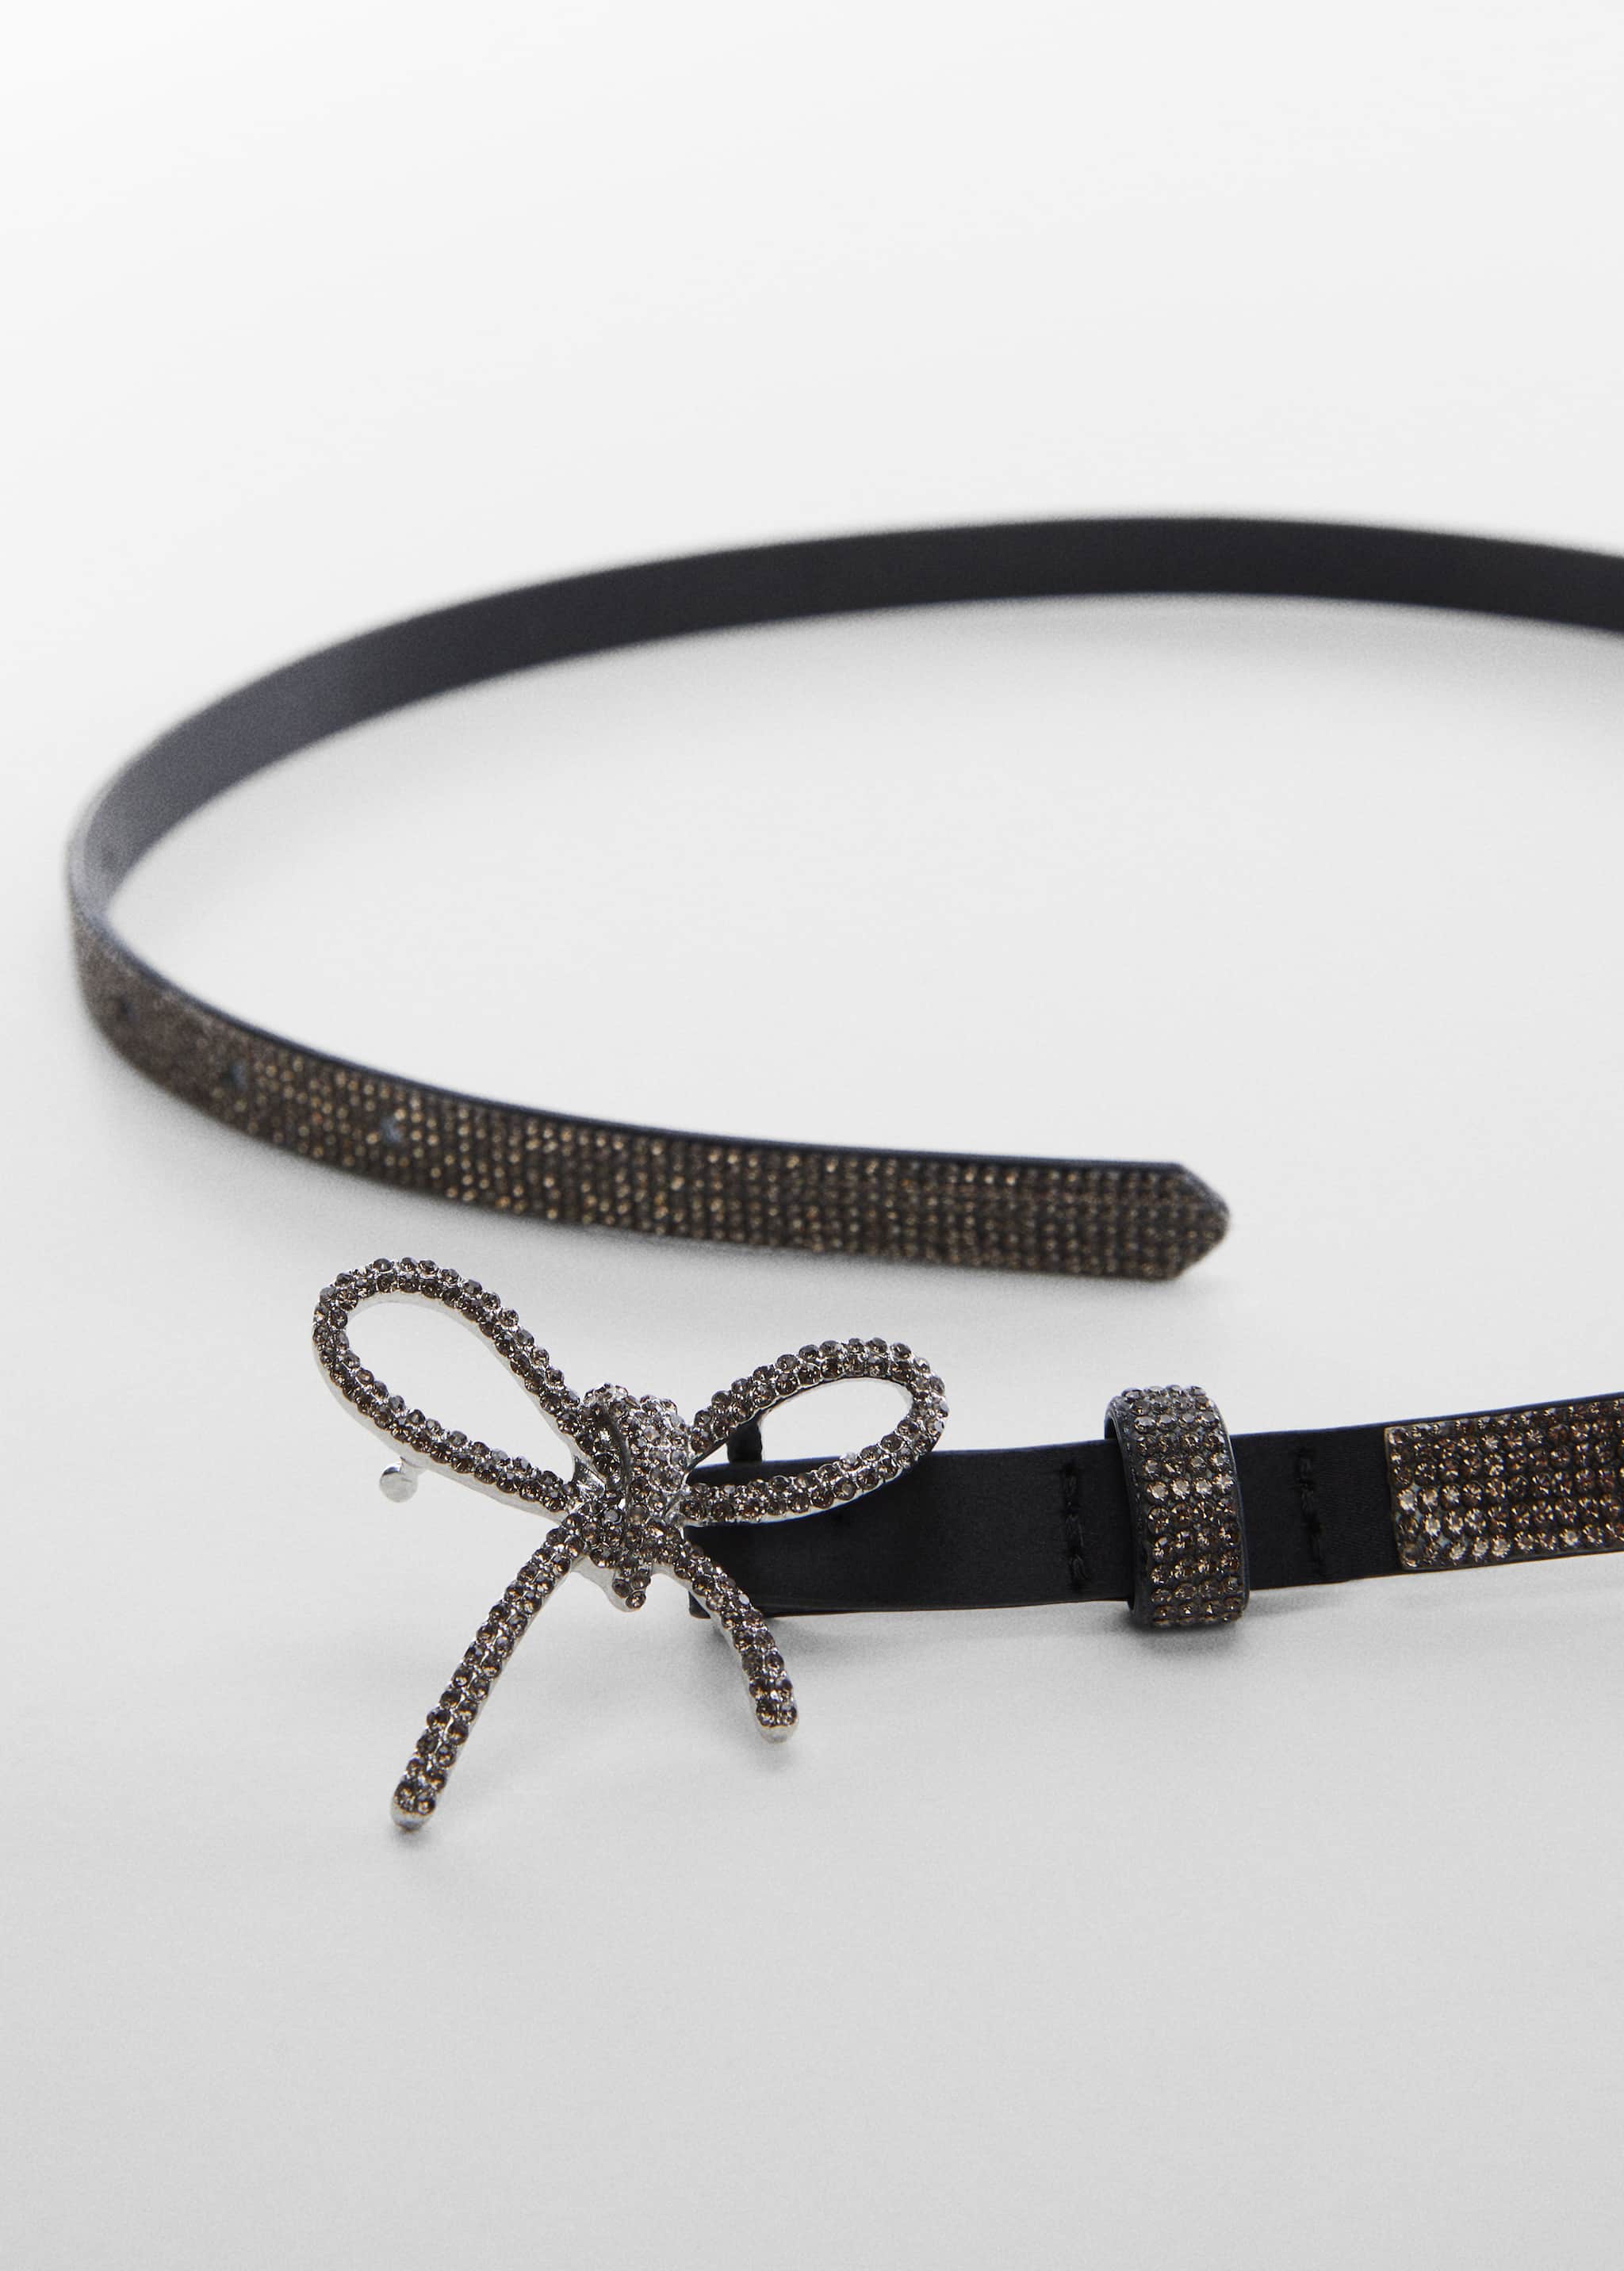 Rhinestone belt with bow - Details of the article 1